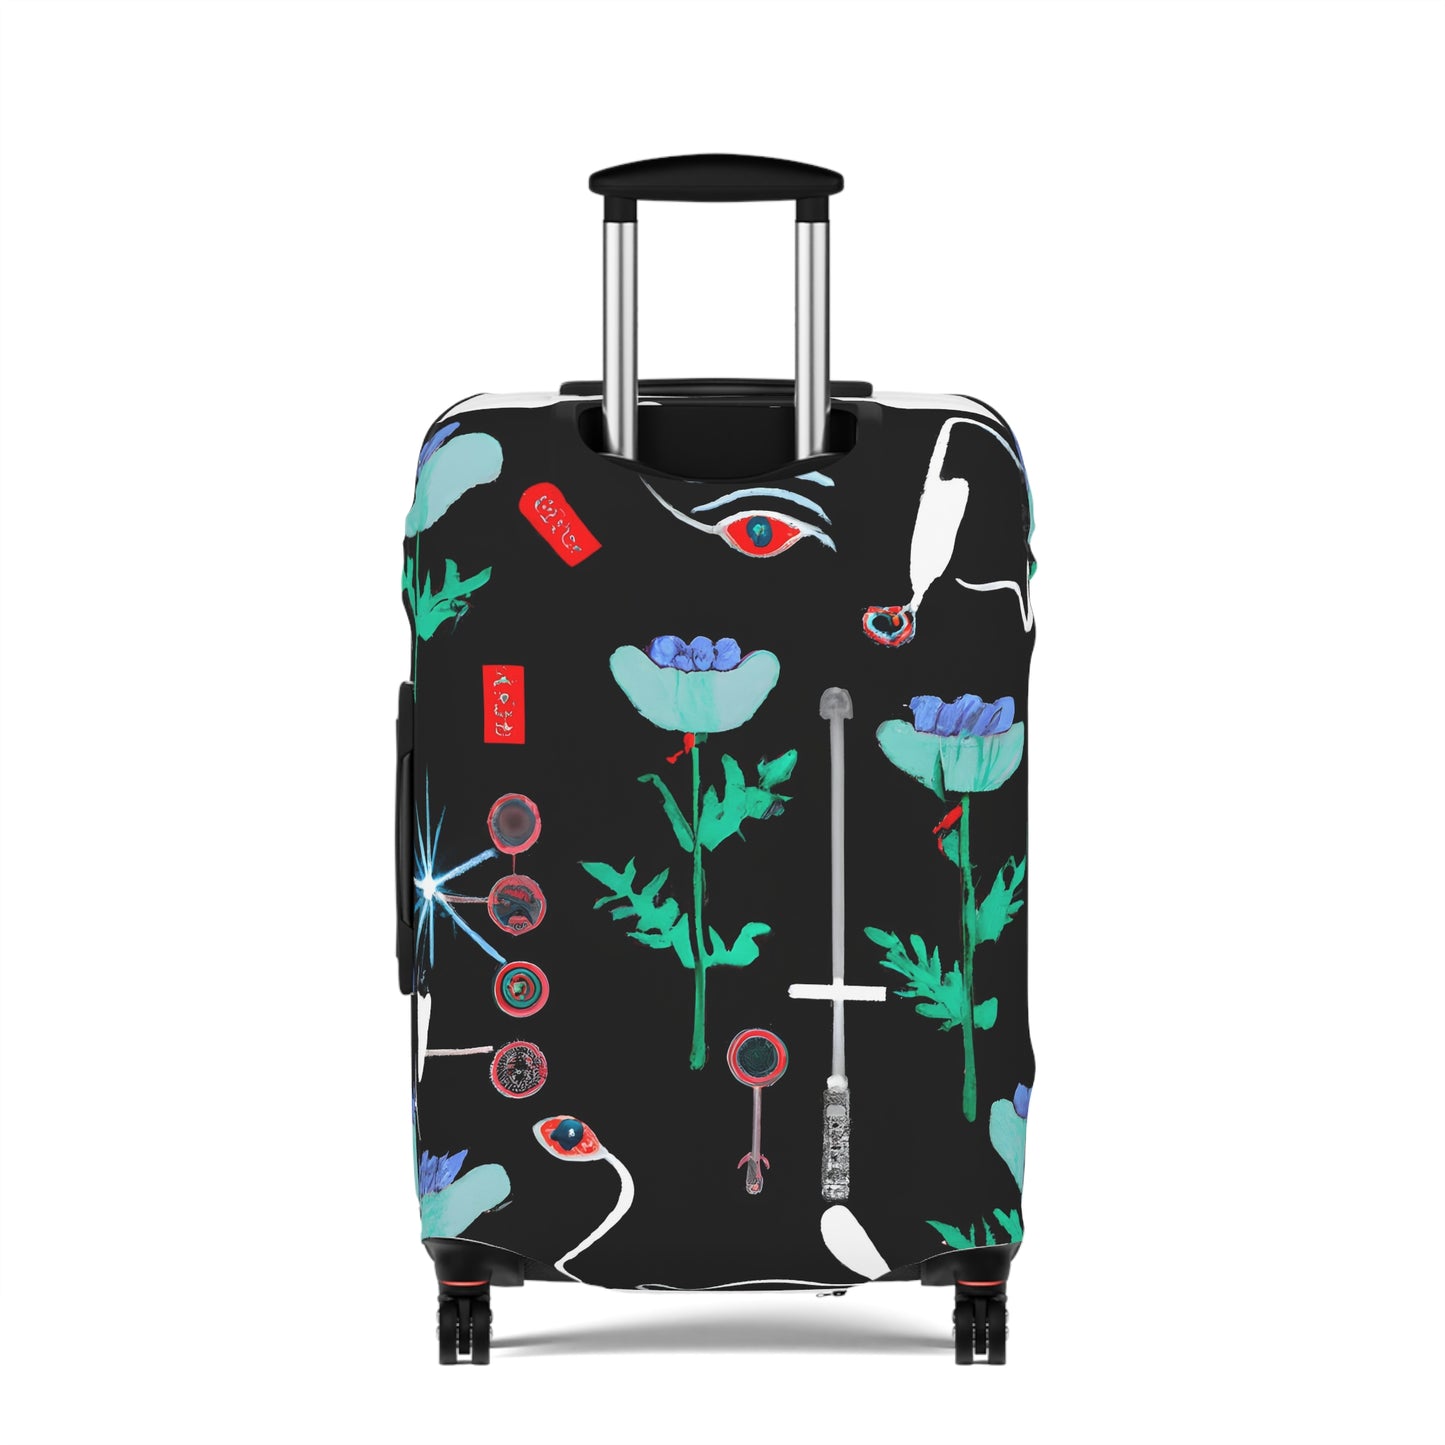 Mystic Wanderer - Luggage Cover